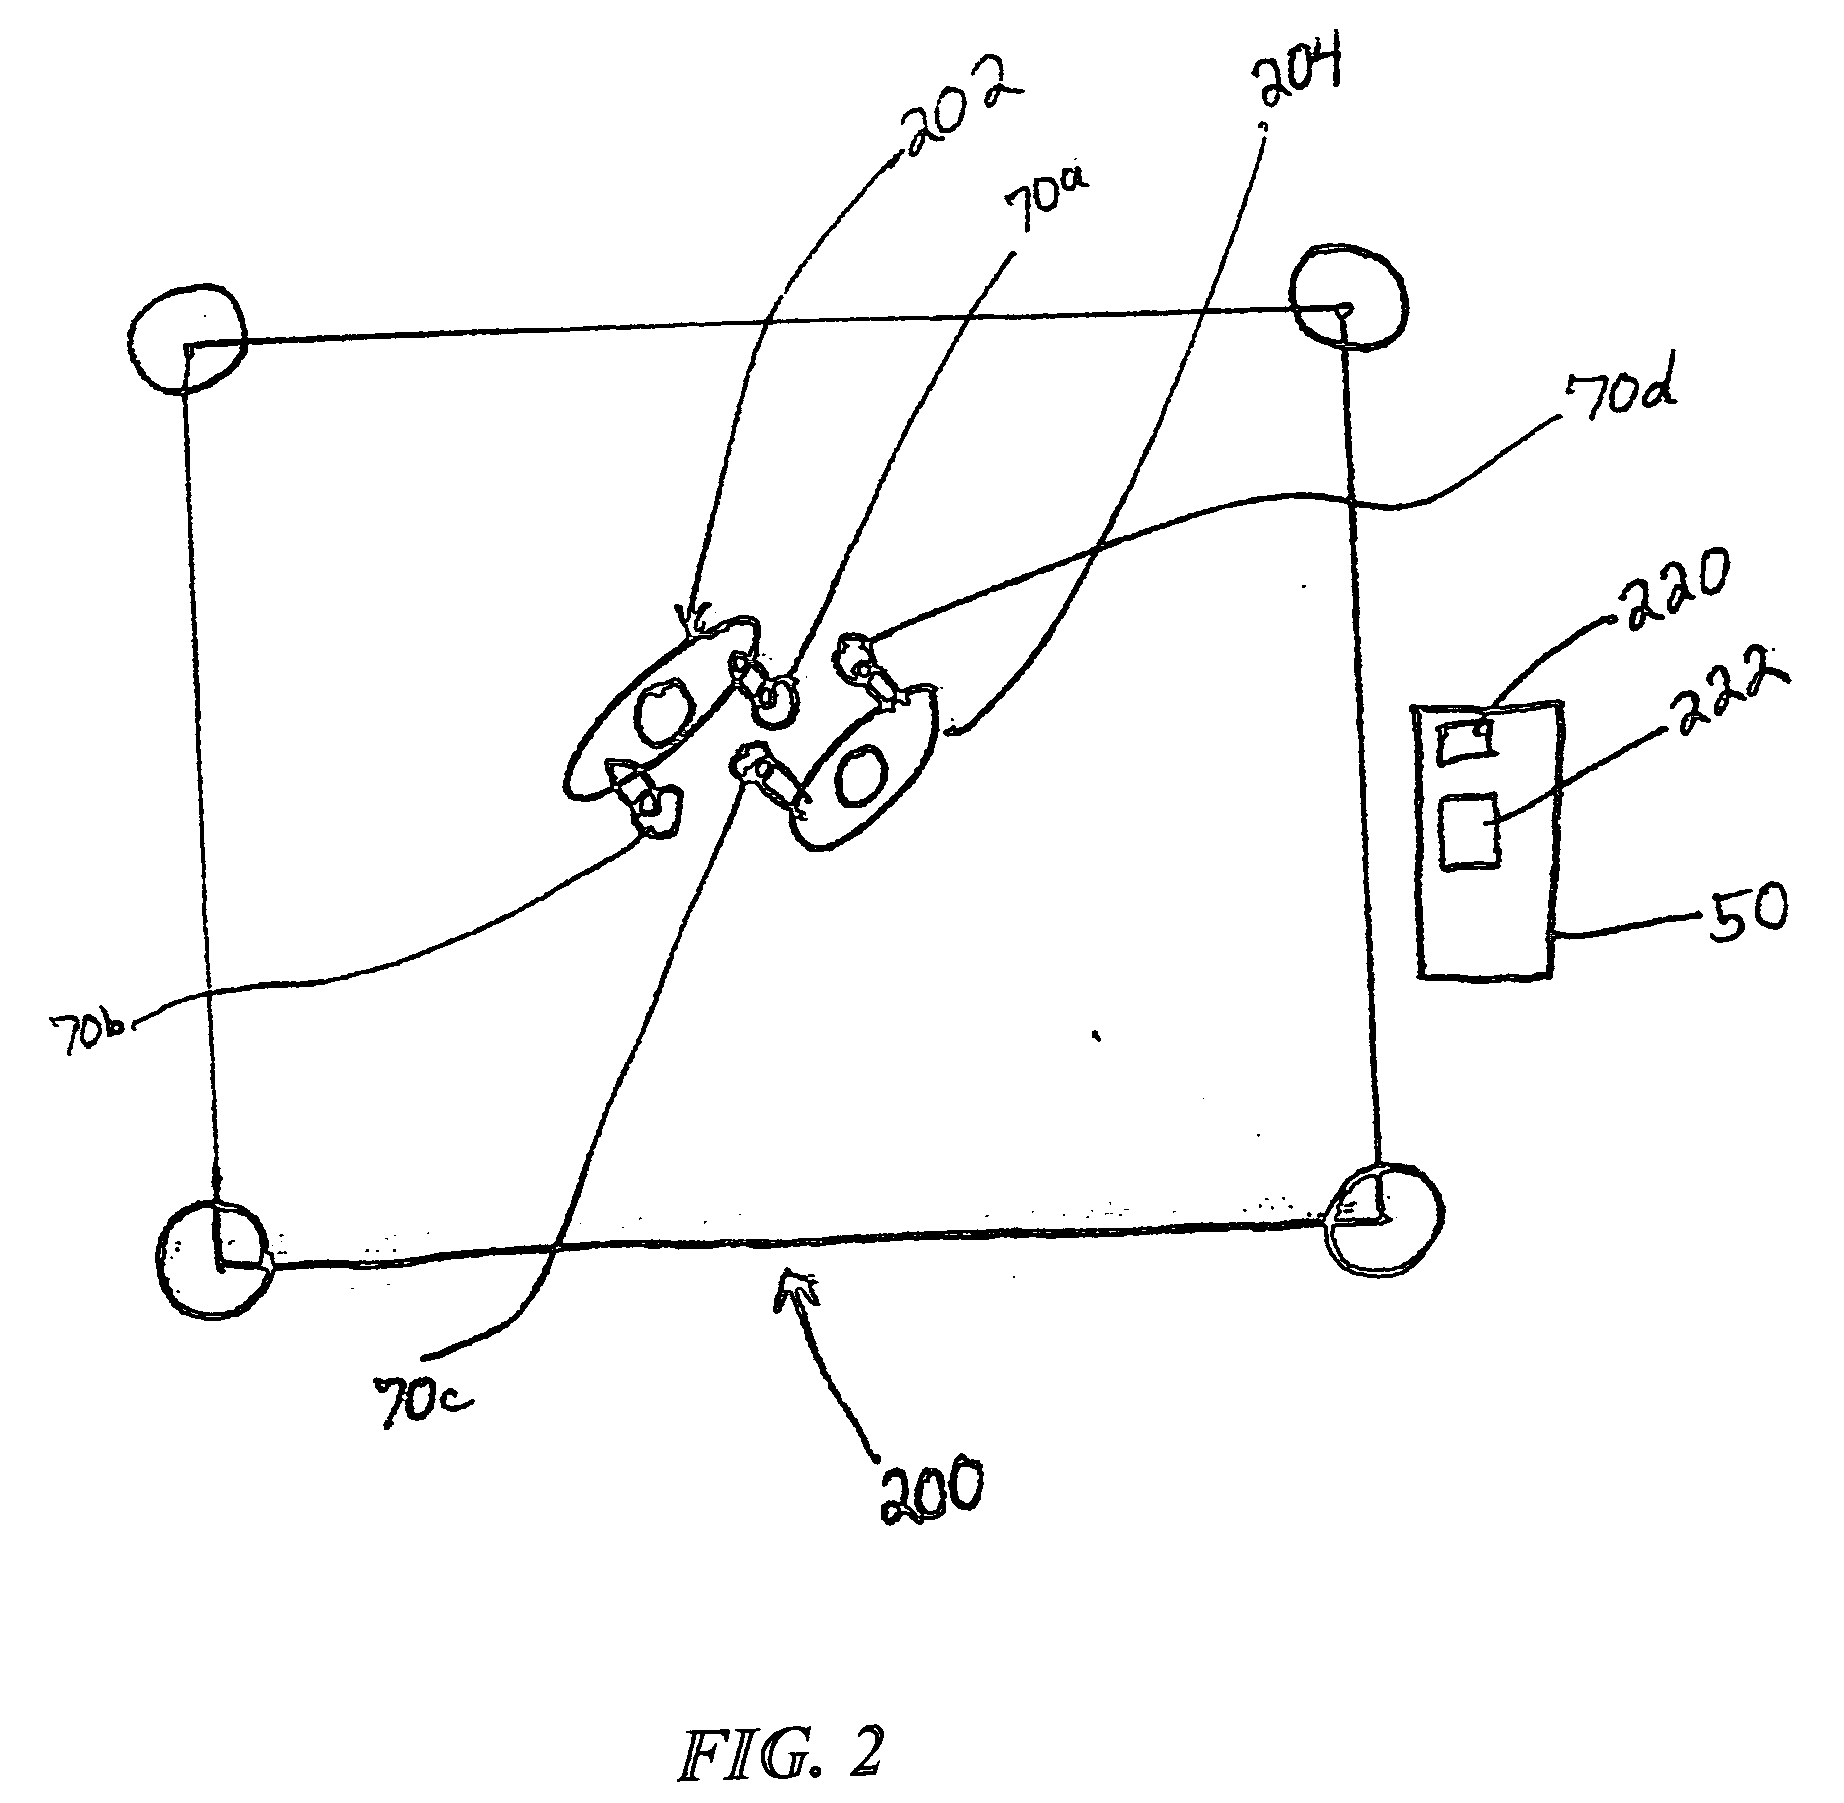 System, method and device for monitoring an athlete